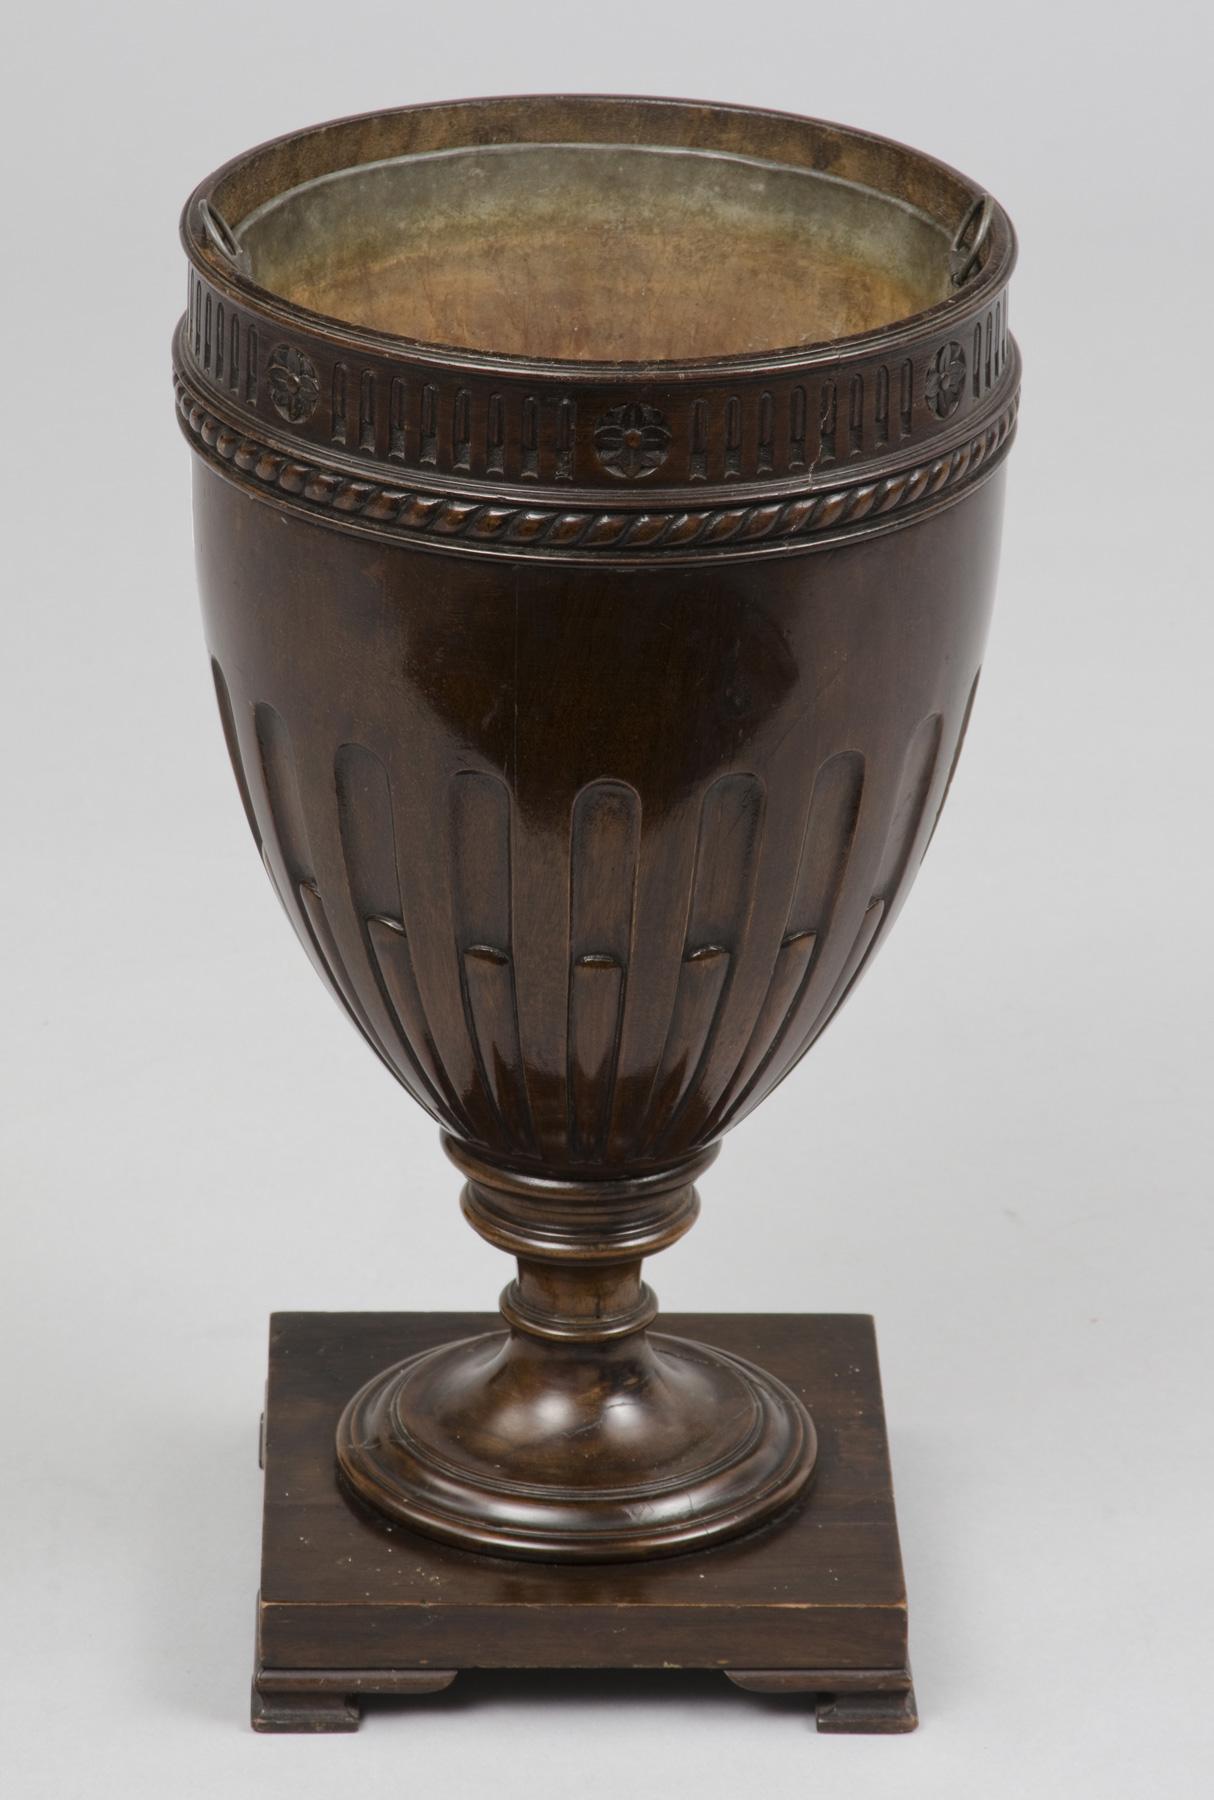 Sheraton style mahogany cutlery vase form urn, the top with carved fluting, stylized flowers and rope border, the bottom with carved stop fluting on turned pedestal and square base on bracket feet. Now converted to a jardinière with a metal liner.